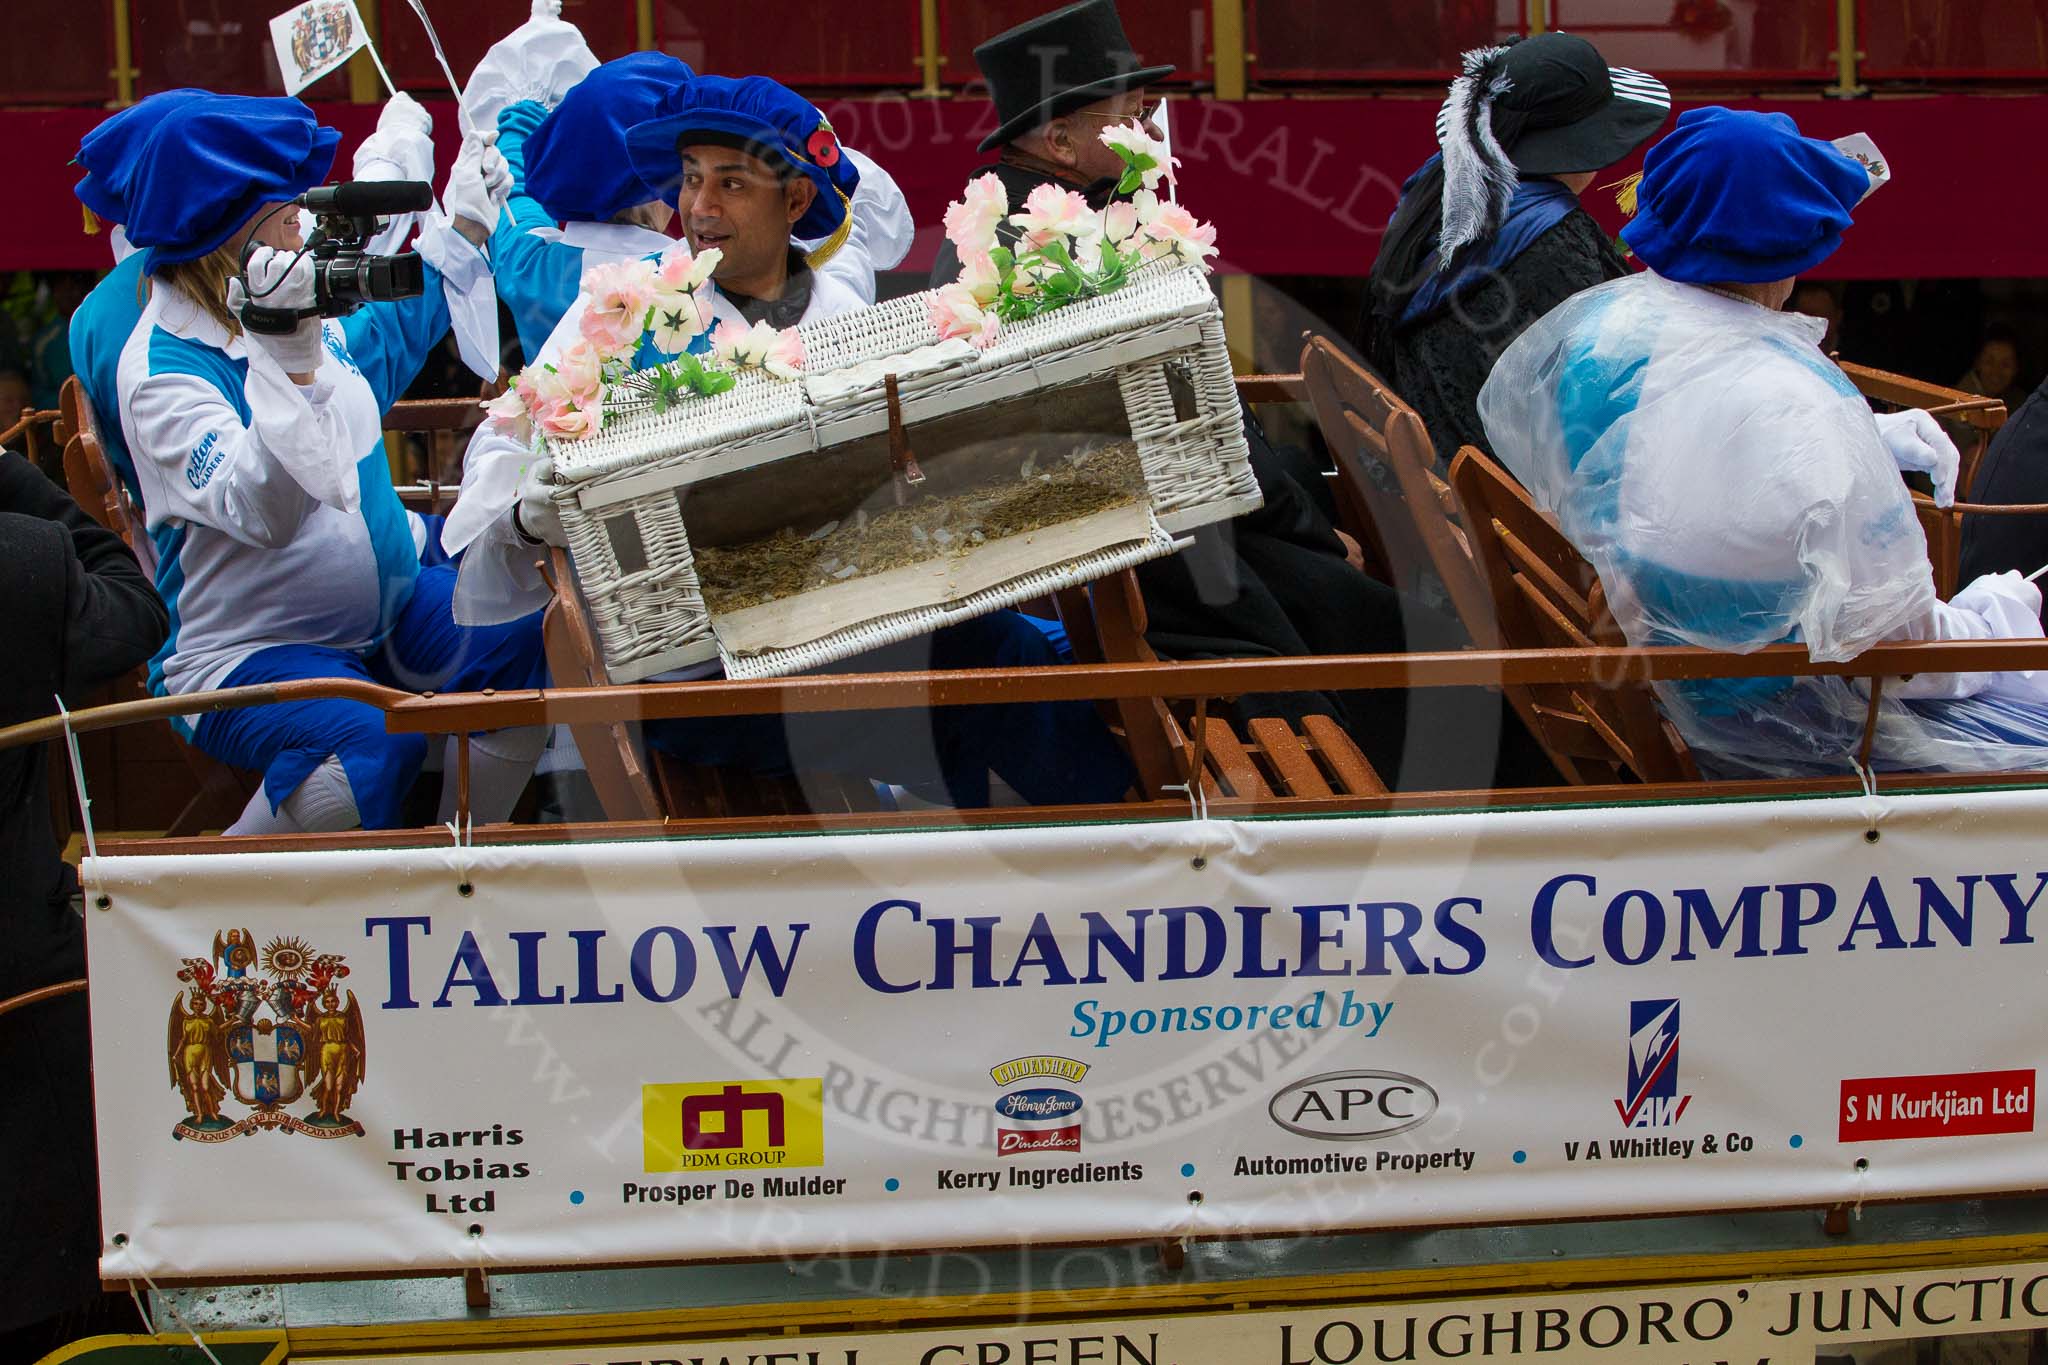 Lord Mayor's Show 2012: Worshipful Company of Tallow Chandlers..
Press stand opposite Mansion House, City of London,
London,
Greater London,
United Kingdom,
on 10 November 2012 at 11:04, image #263